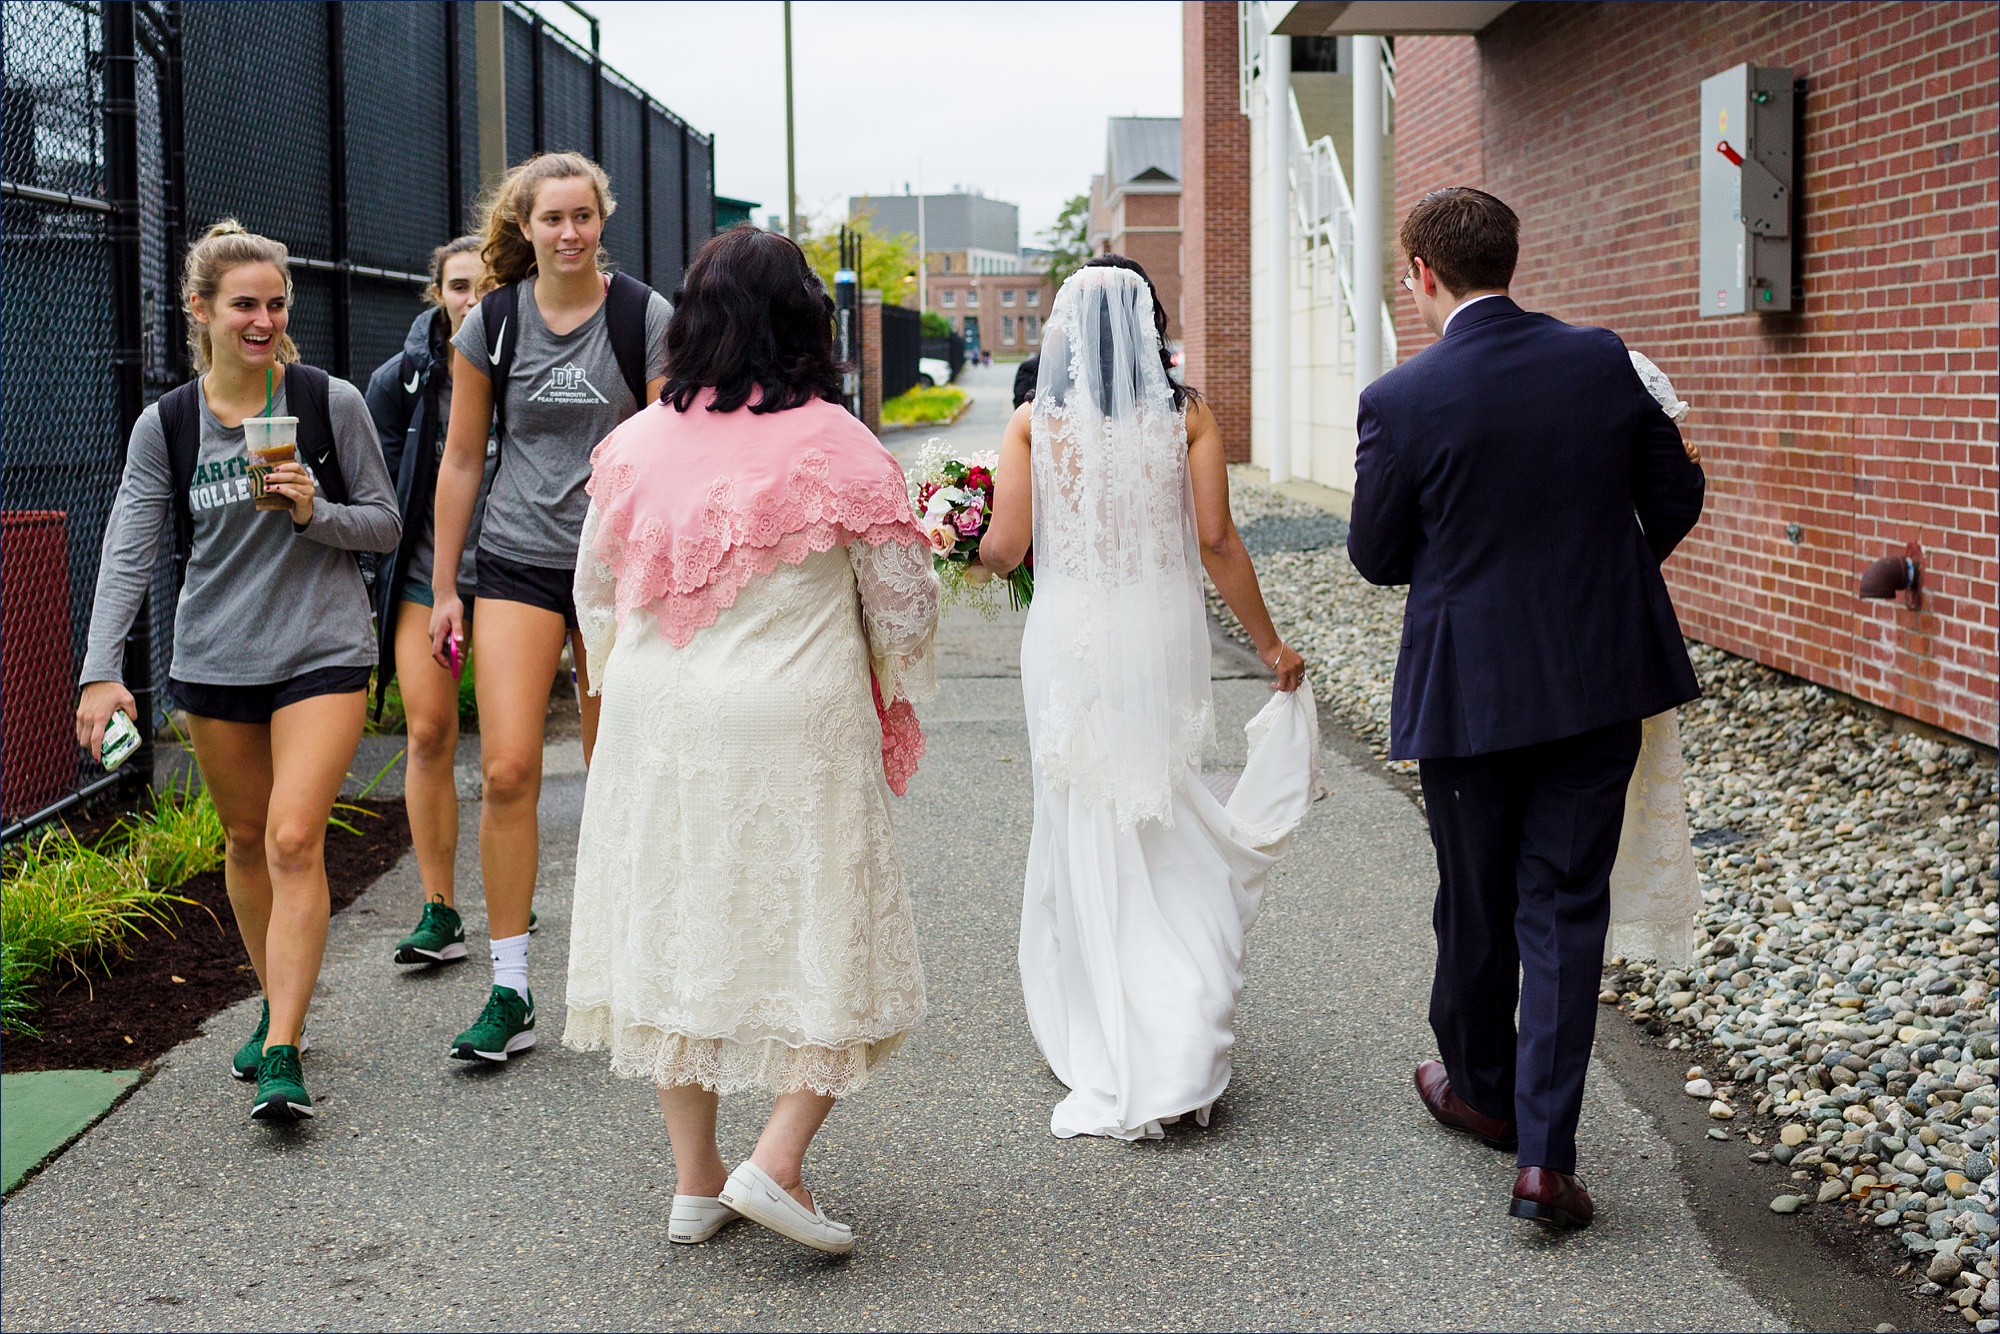 The family gets smiles from Dartmouth students as they head to the wedding ceremony